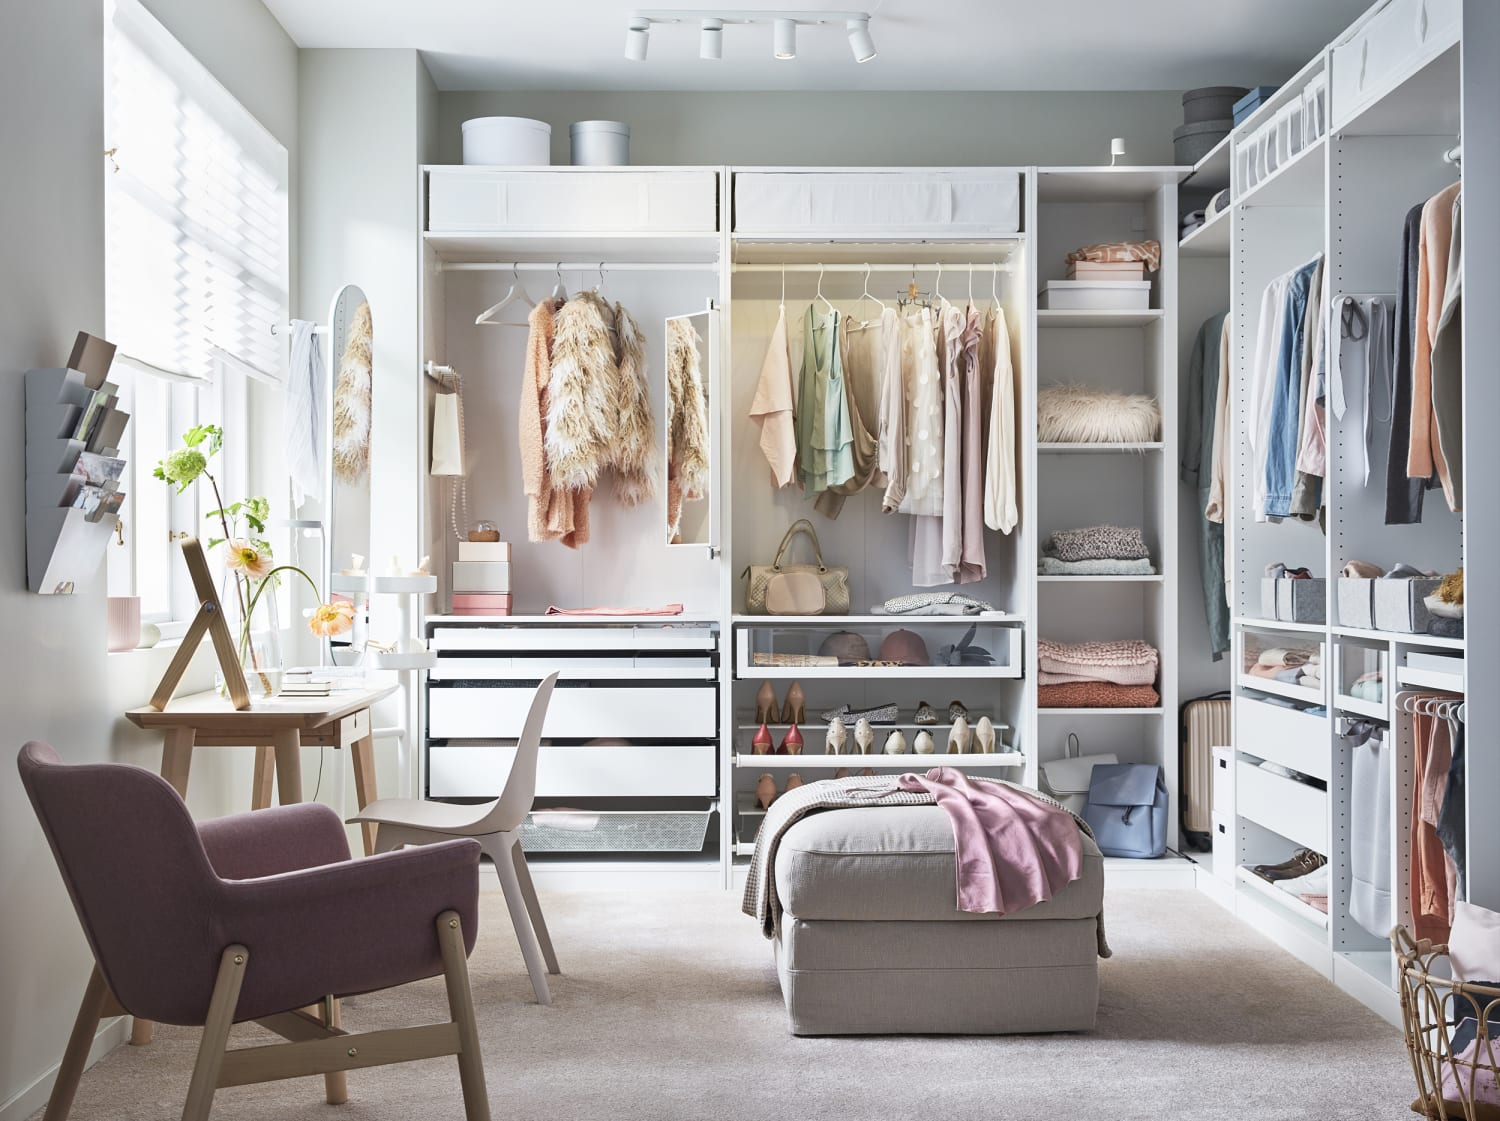 Mier Verplaatsing focus Everything you need to know about buying (and installing) an IKEA closet  system